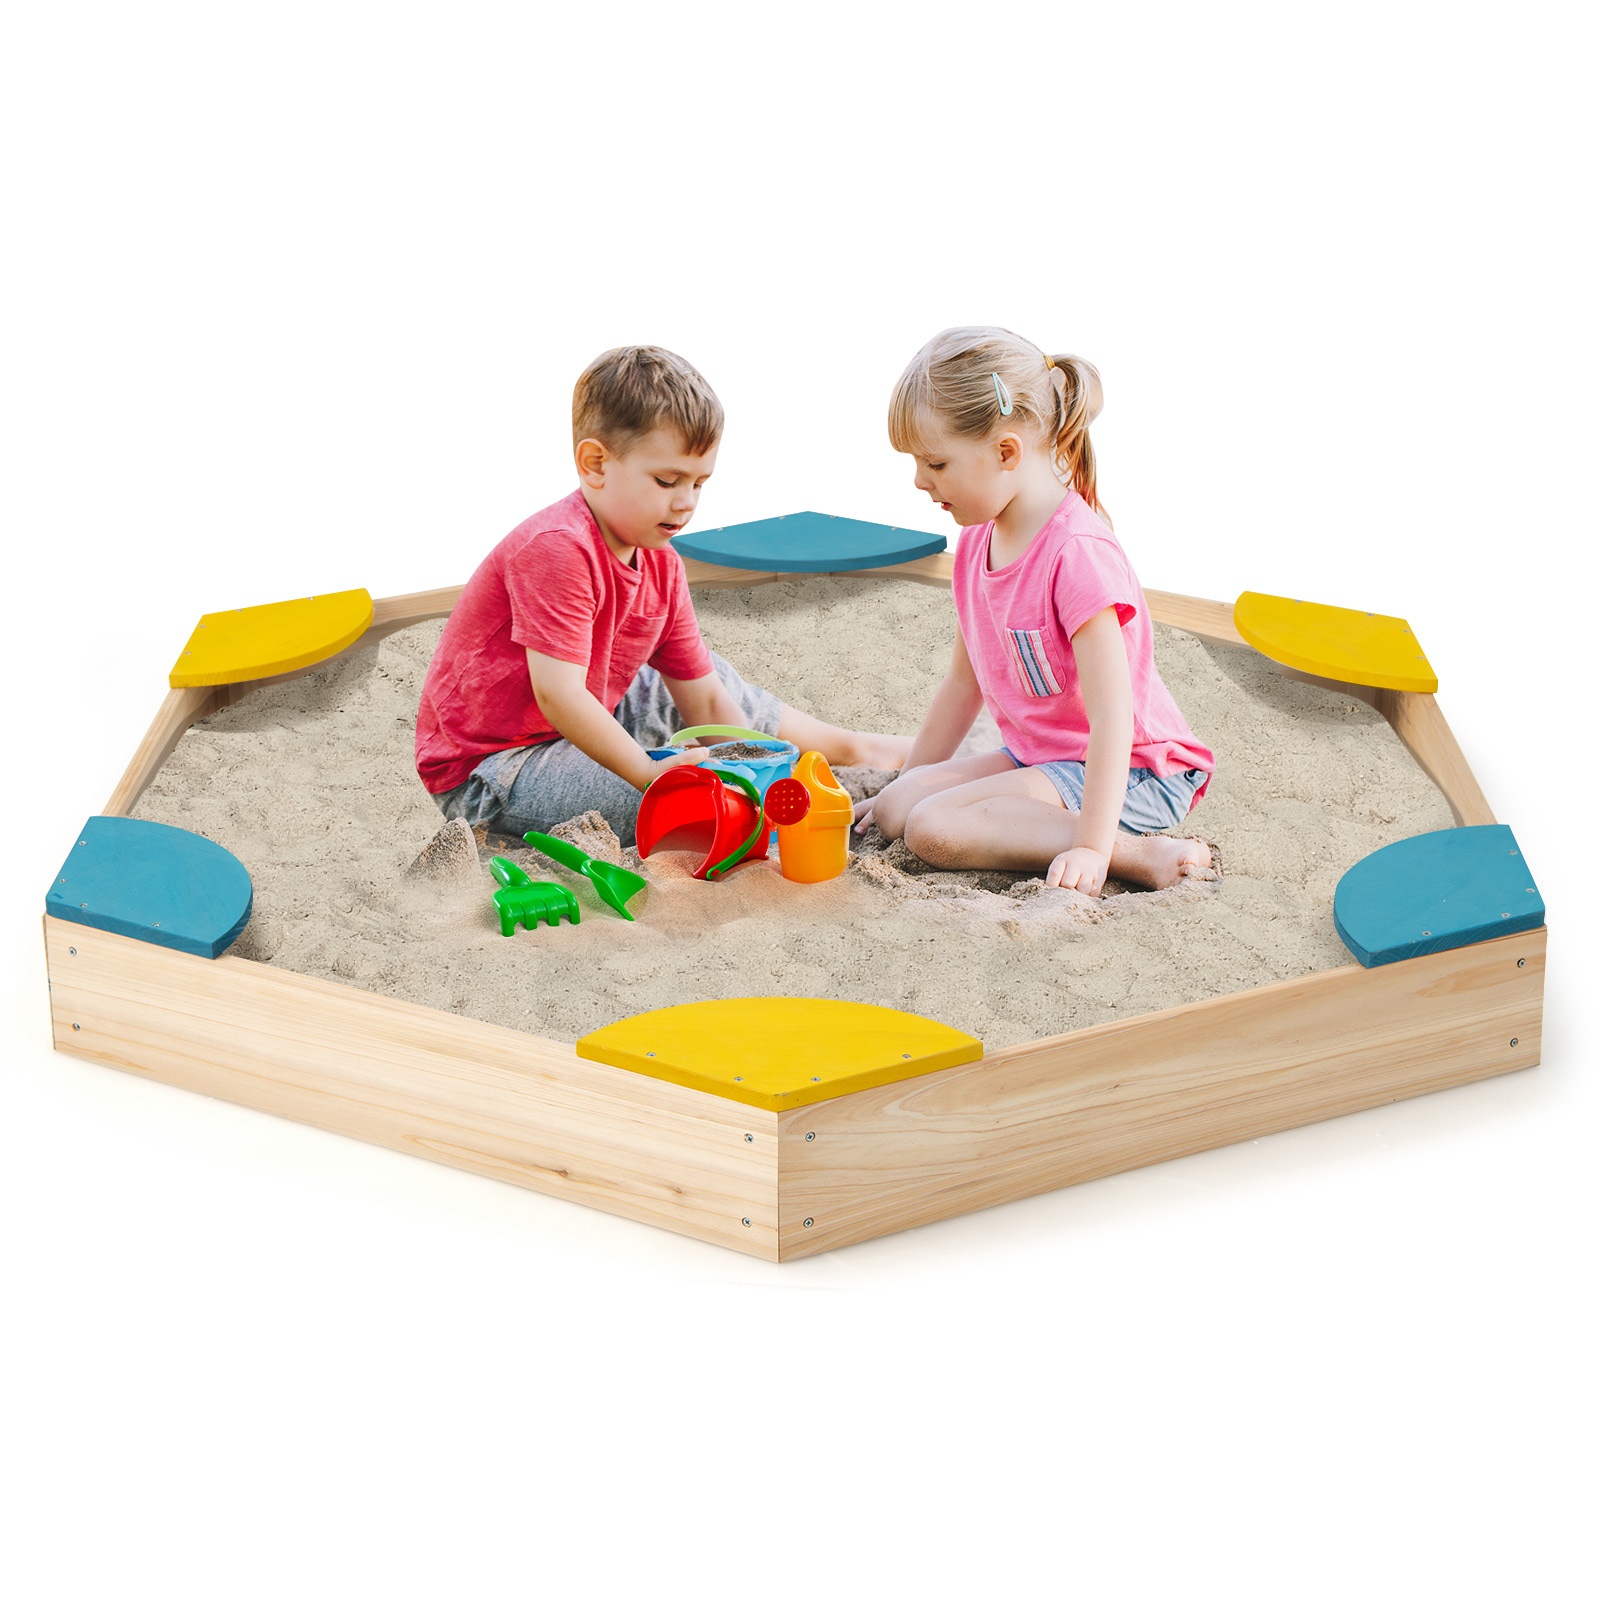 Wooden Sandbox with 6 Built-in Fan-shaped Seats and Bottomless Structure